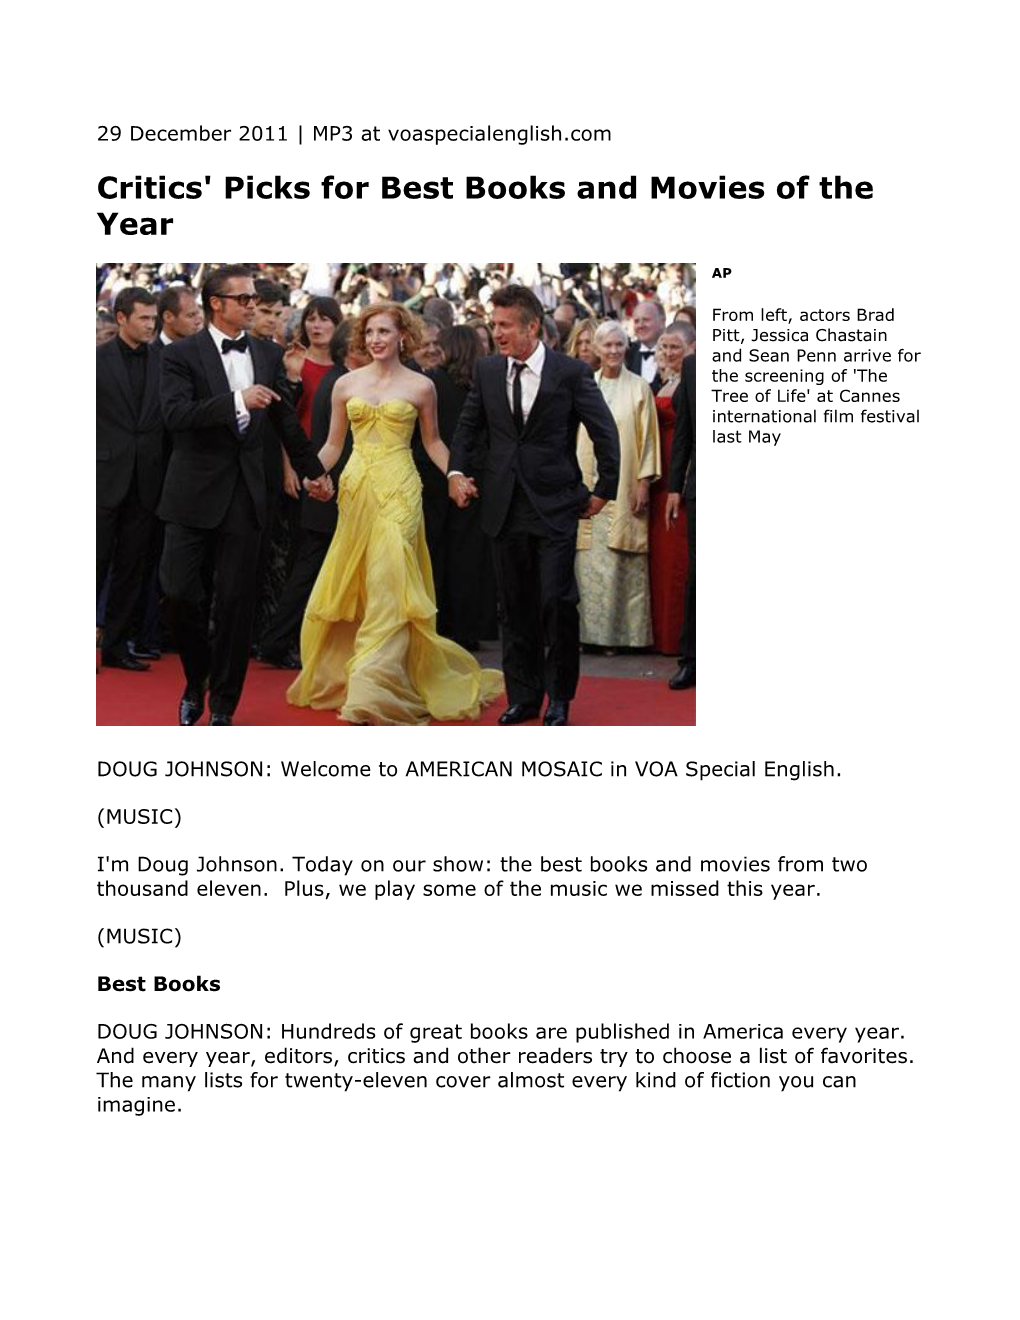 Critics' Picks for Best Books and Movies of the Year